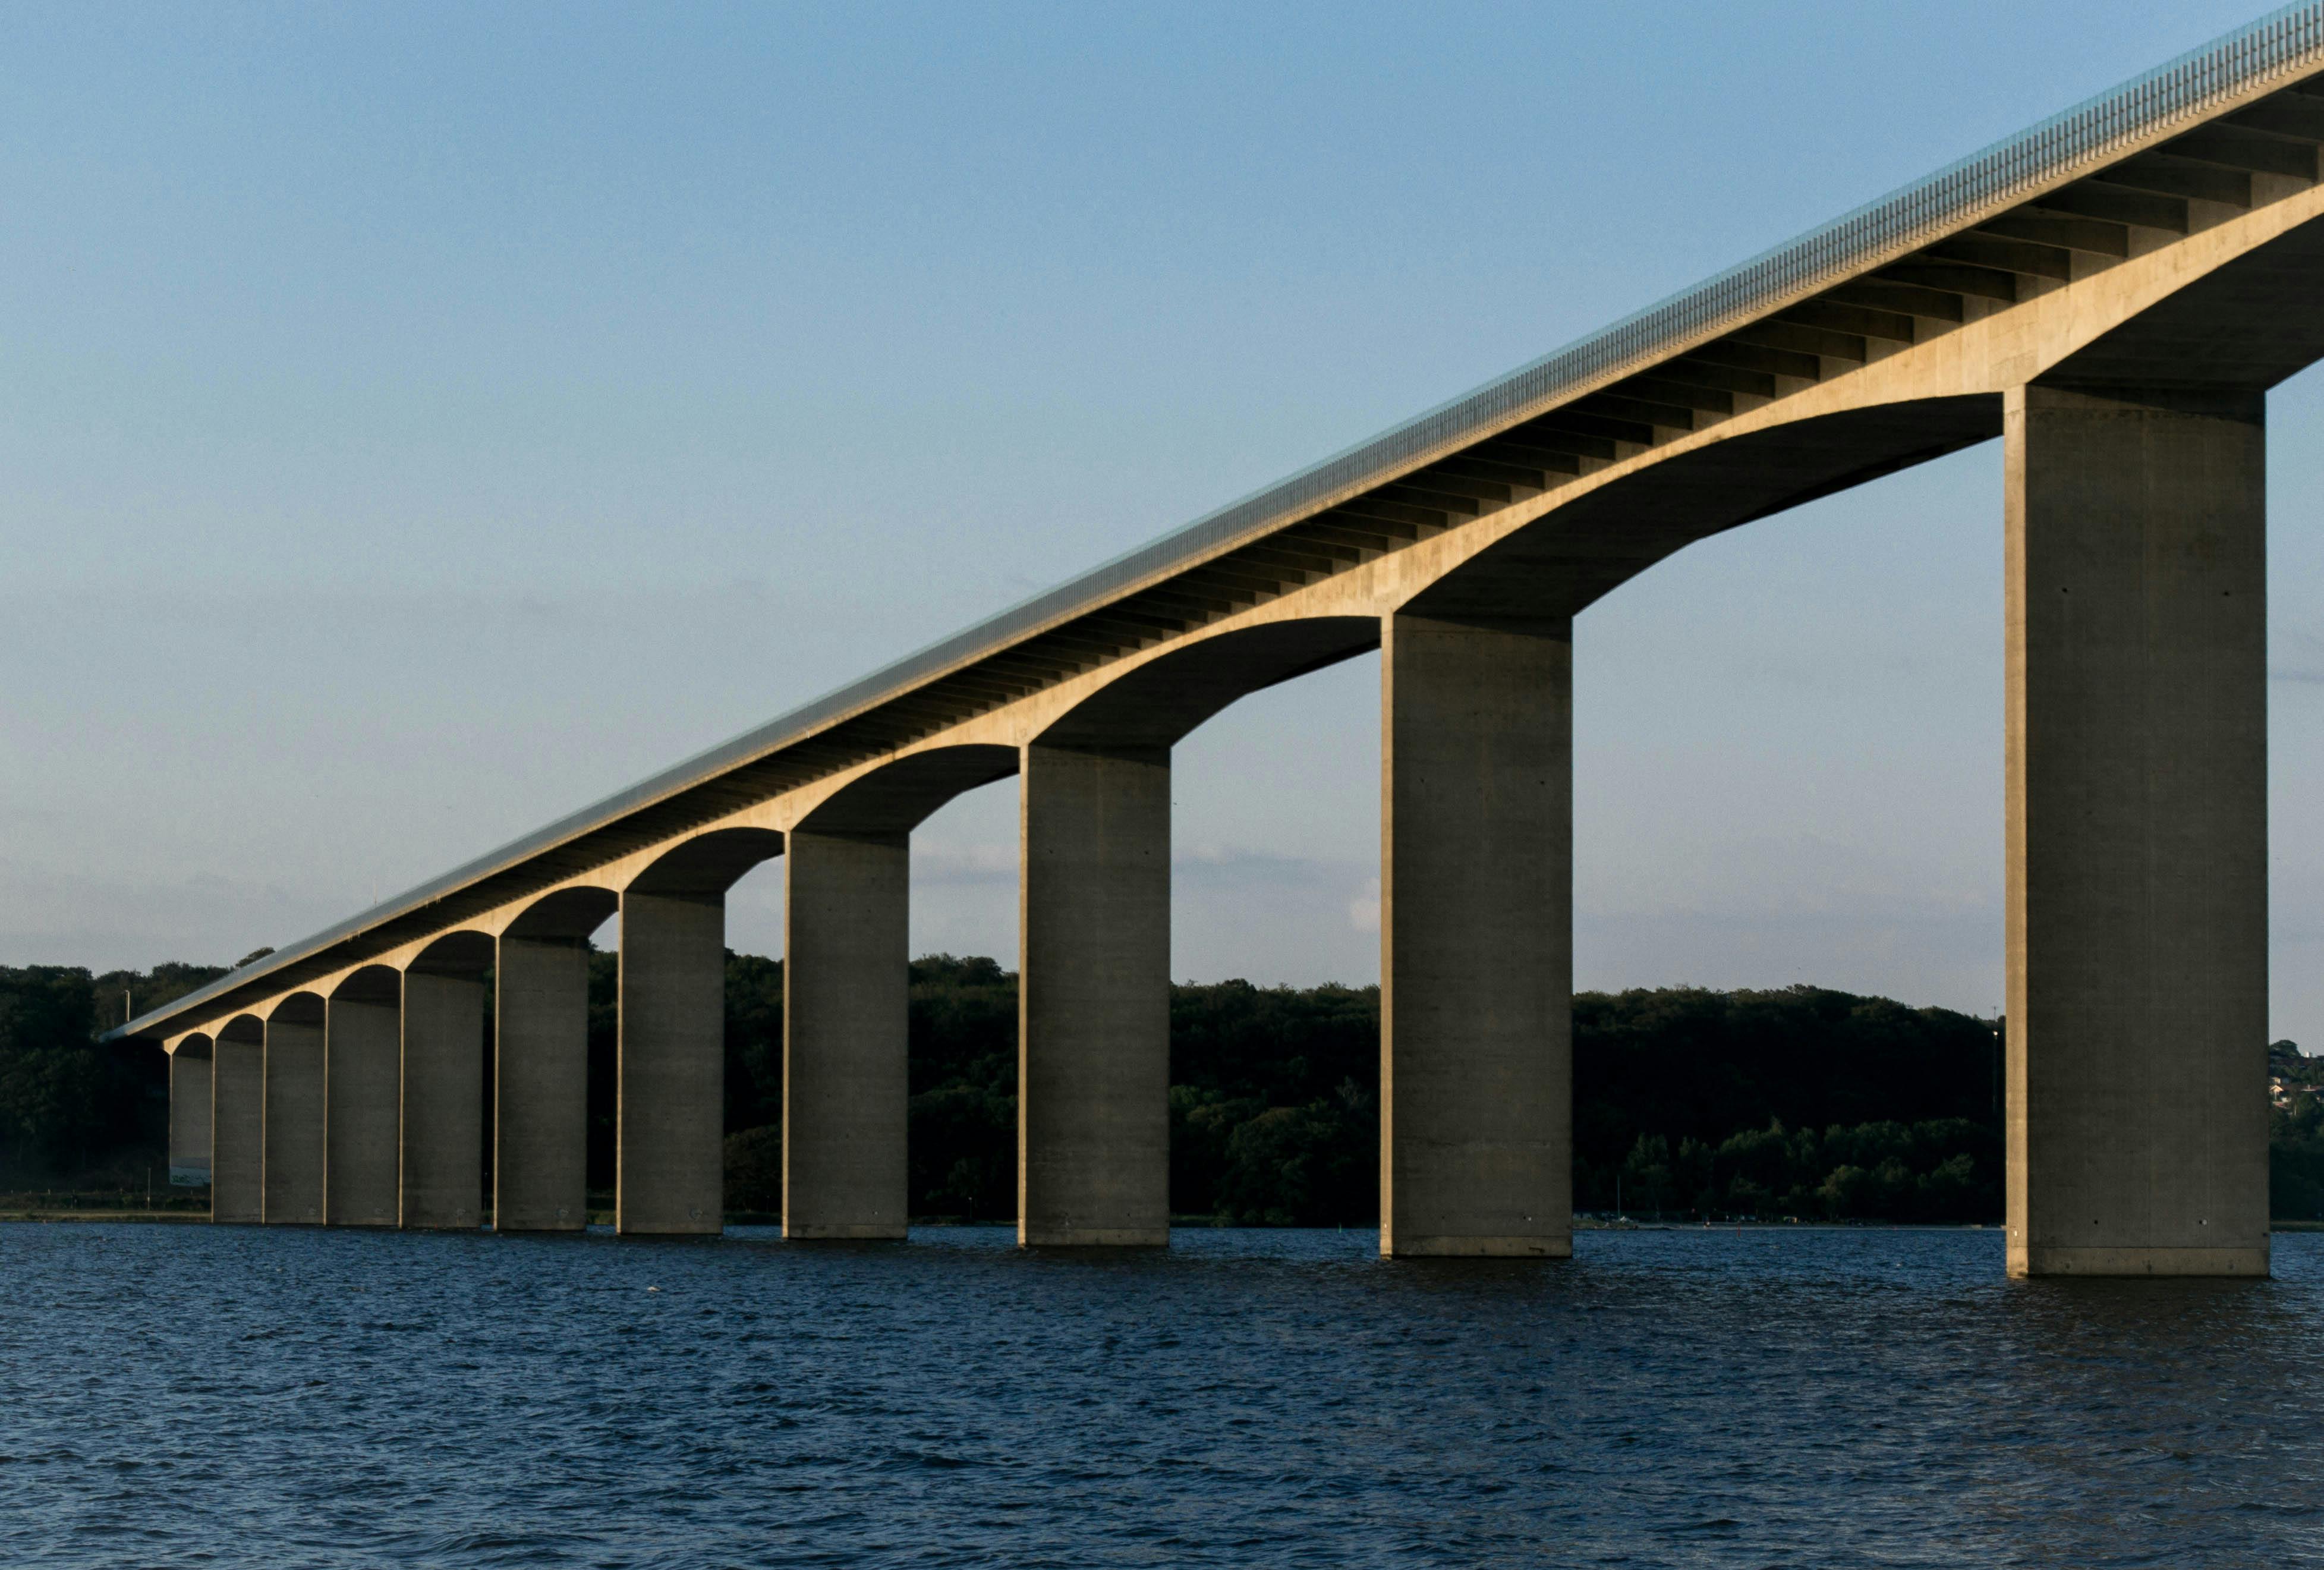 Building a Better Future: The Importance of Investing in Transportation and Infrastructure